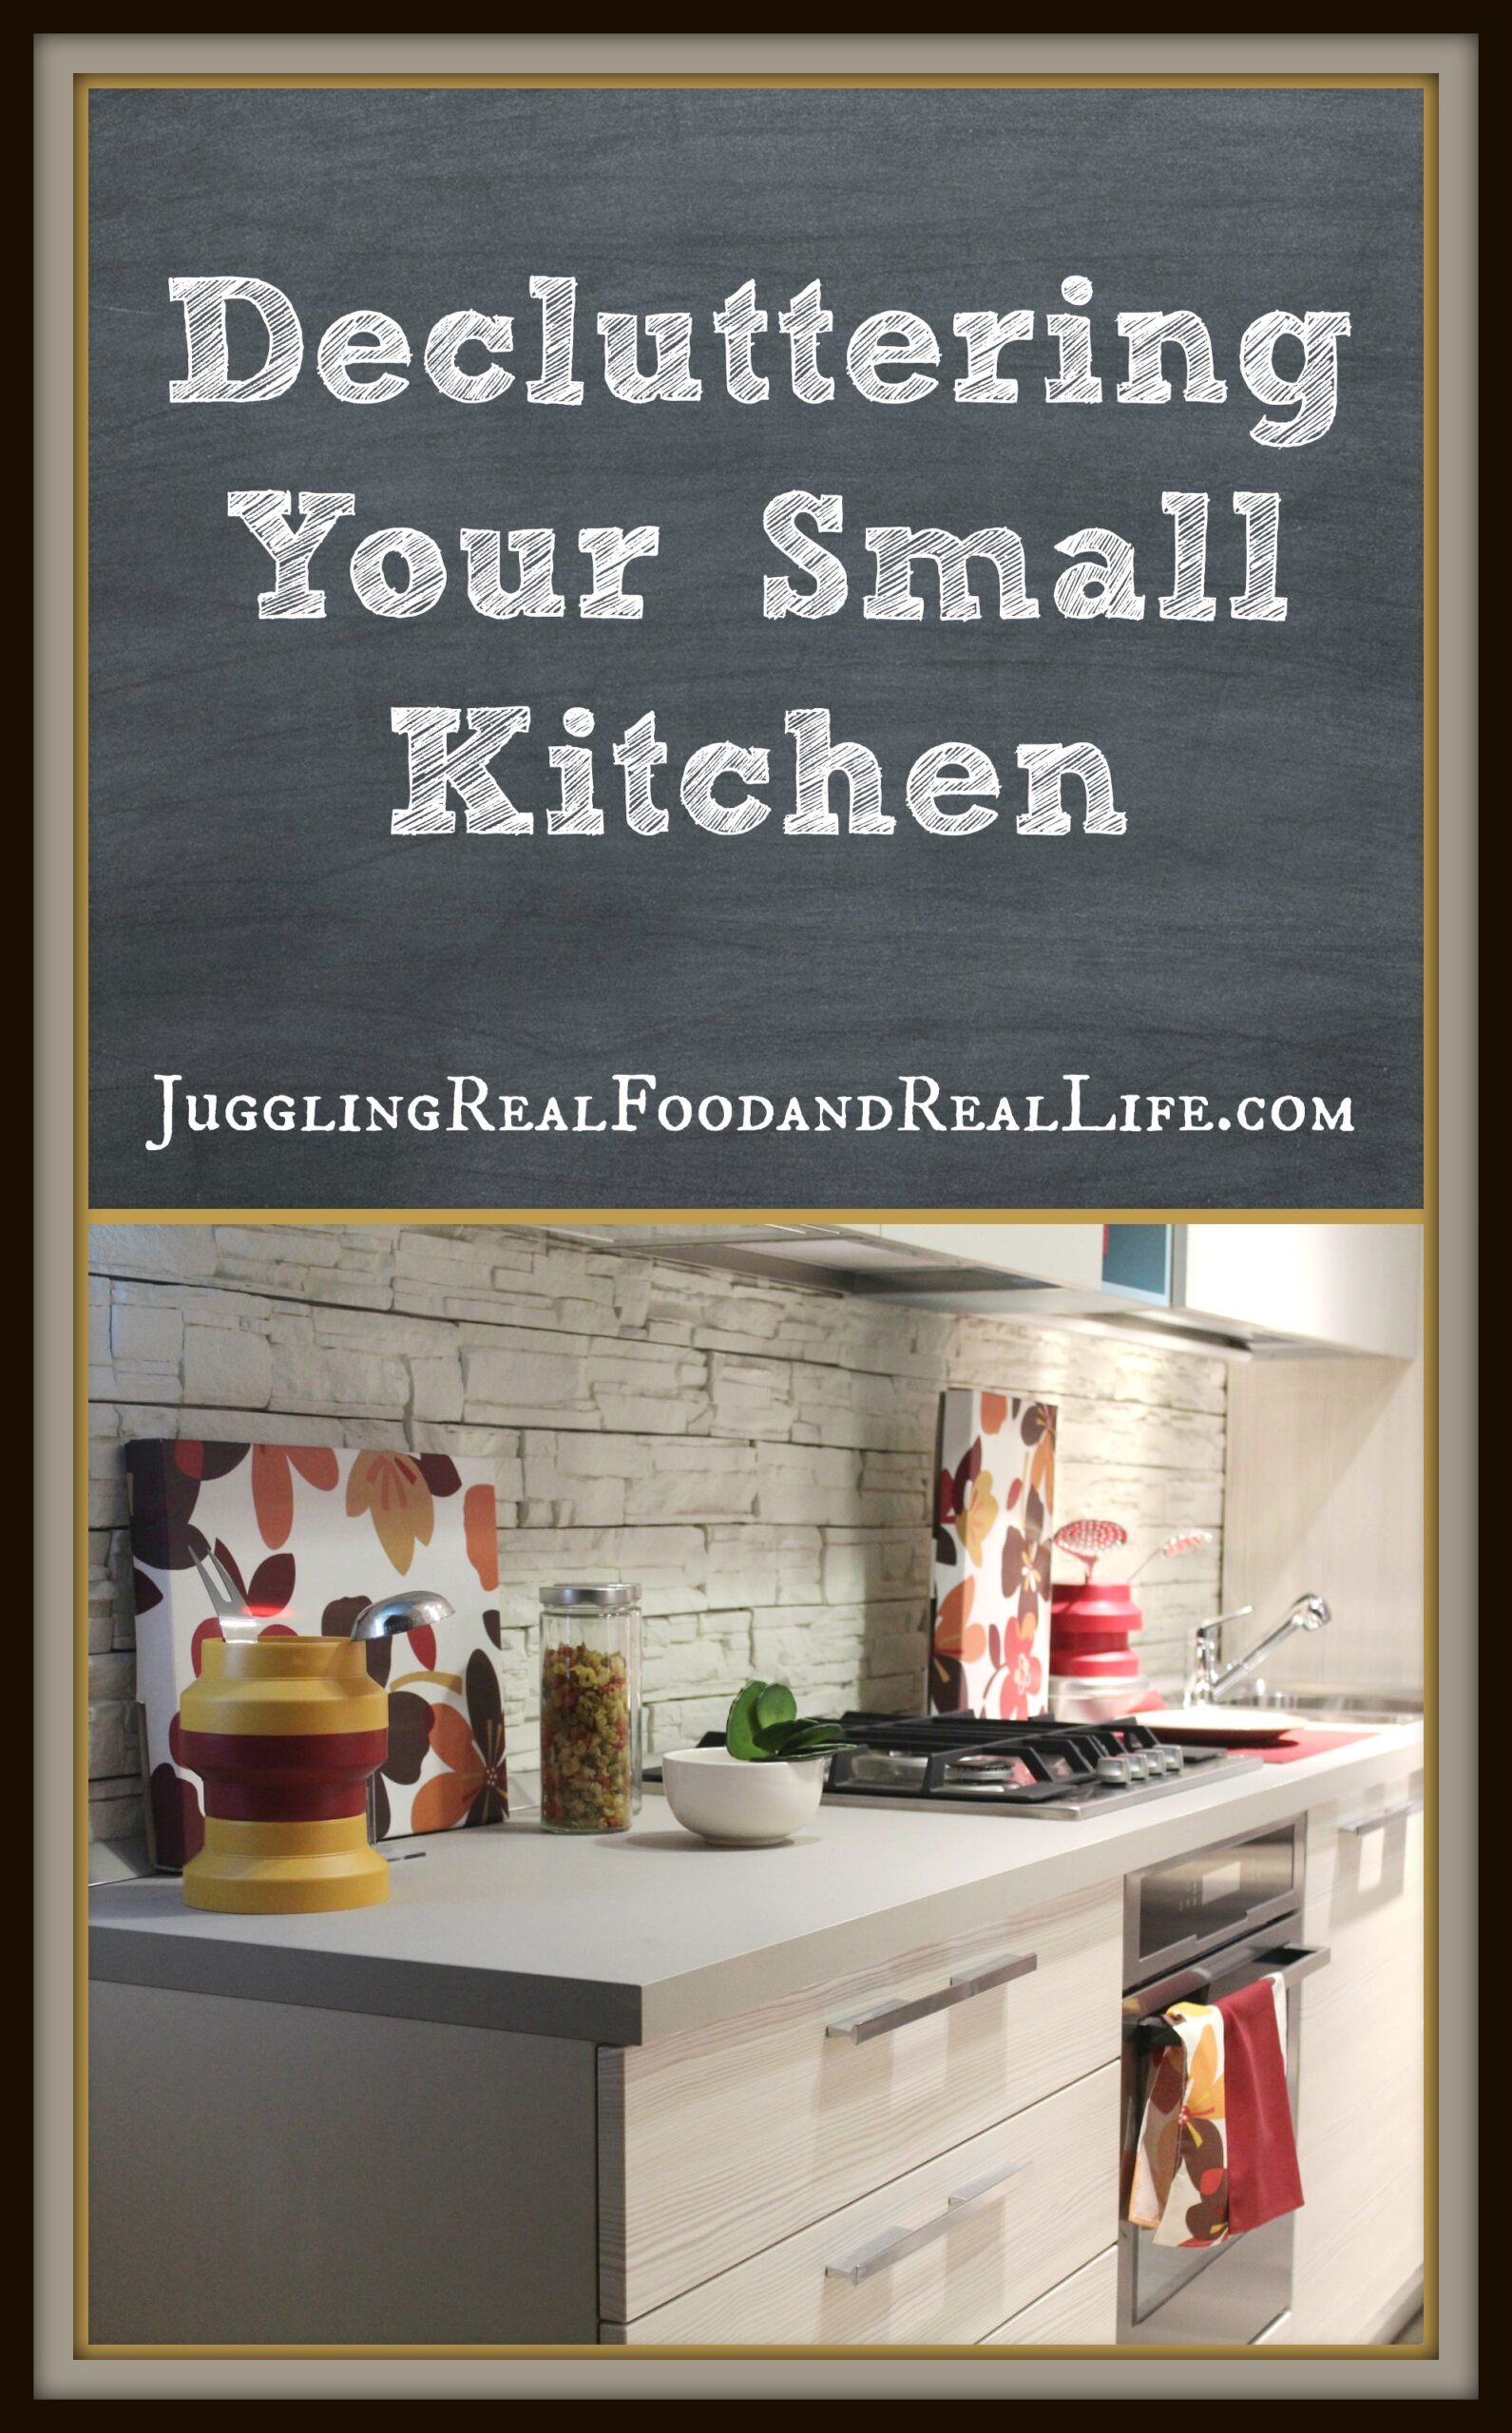 Decluttering Your Small Kitchen